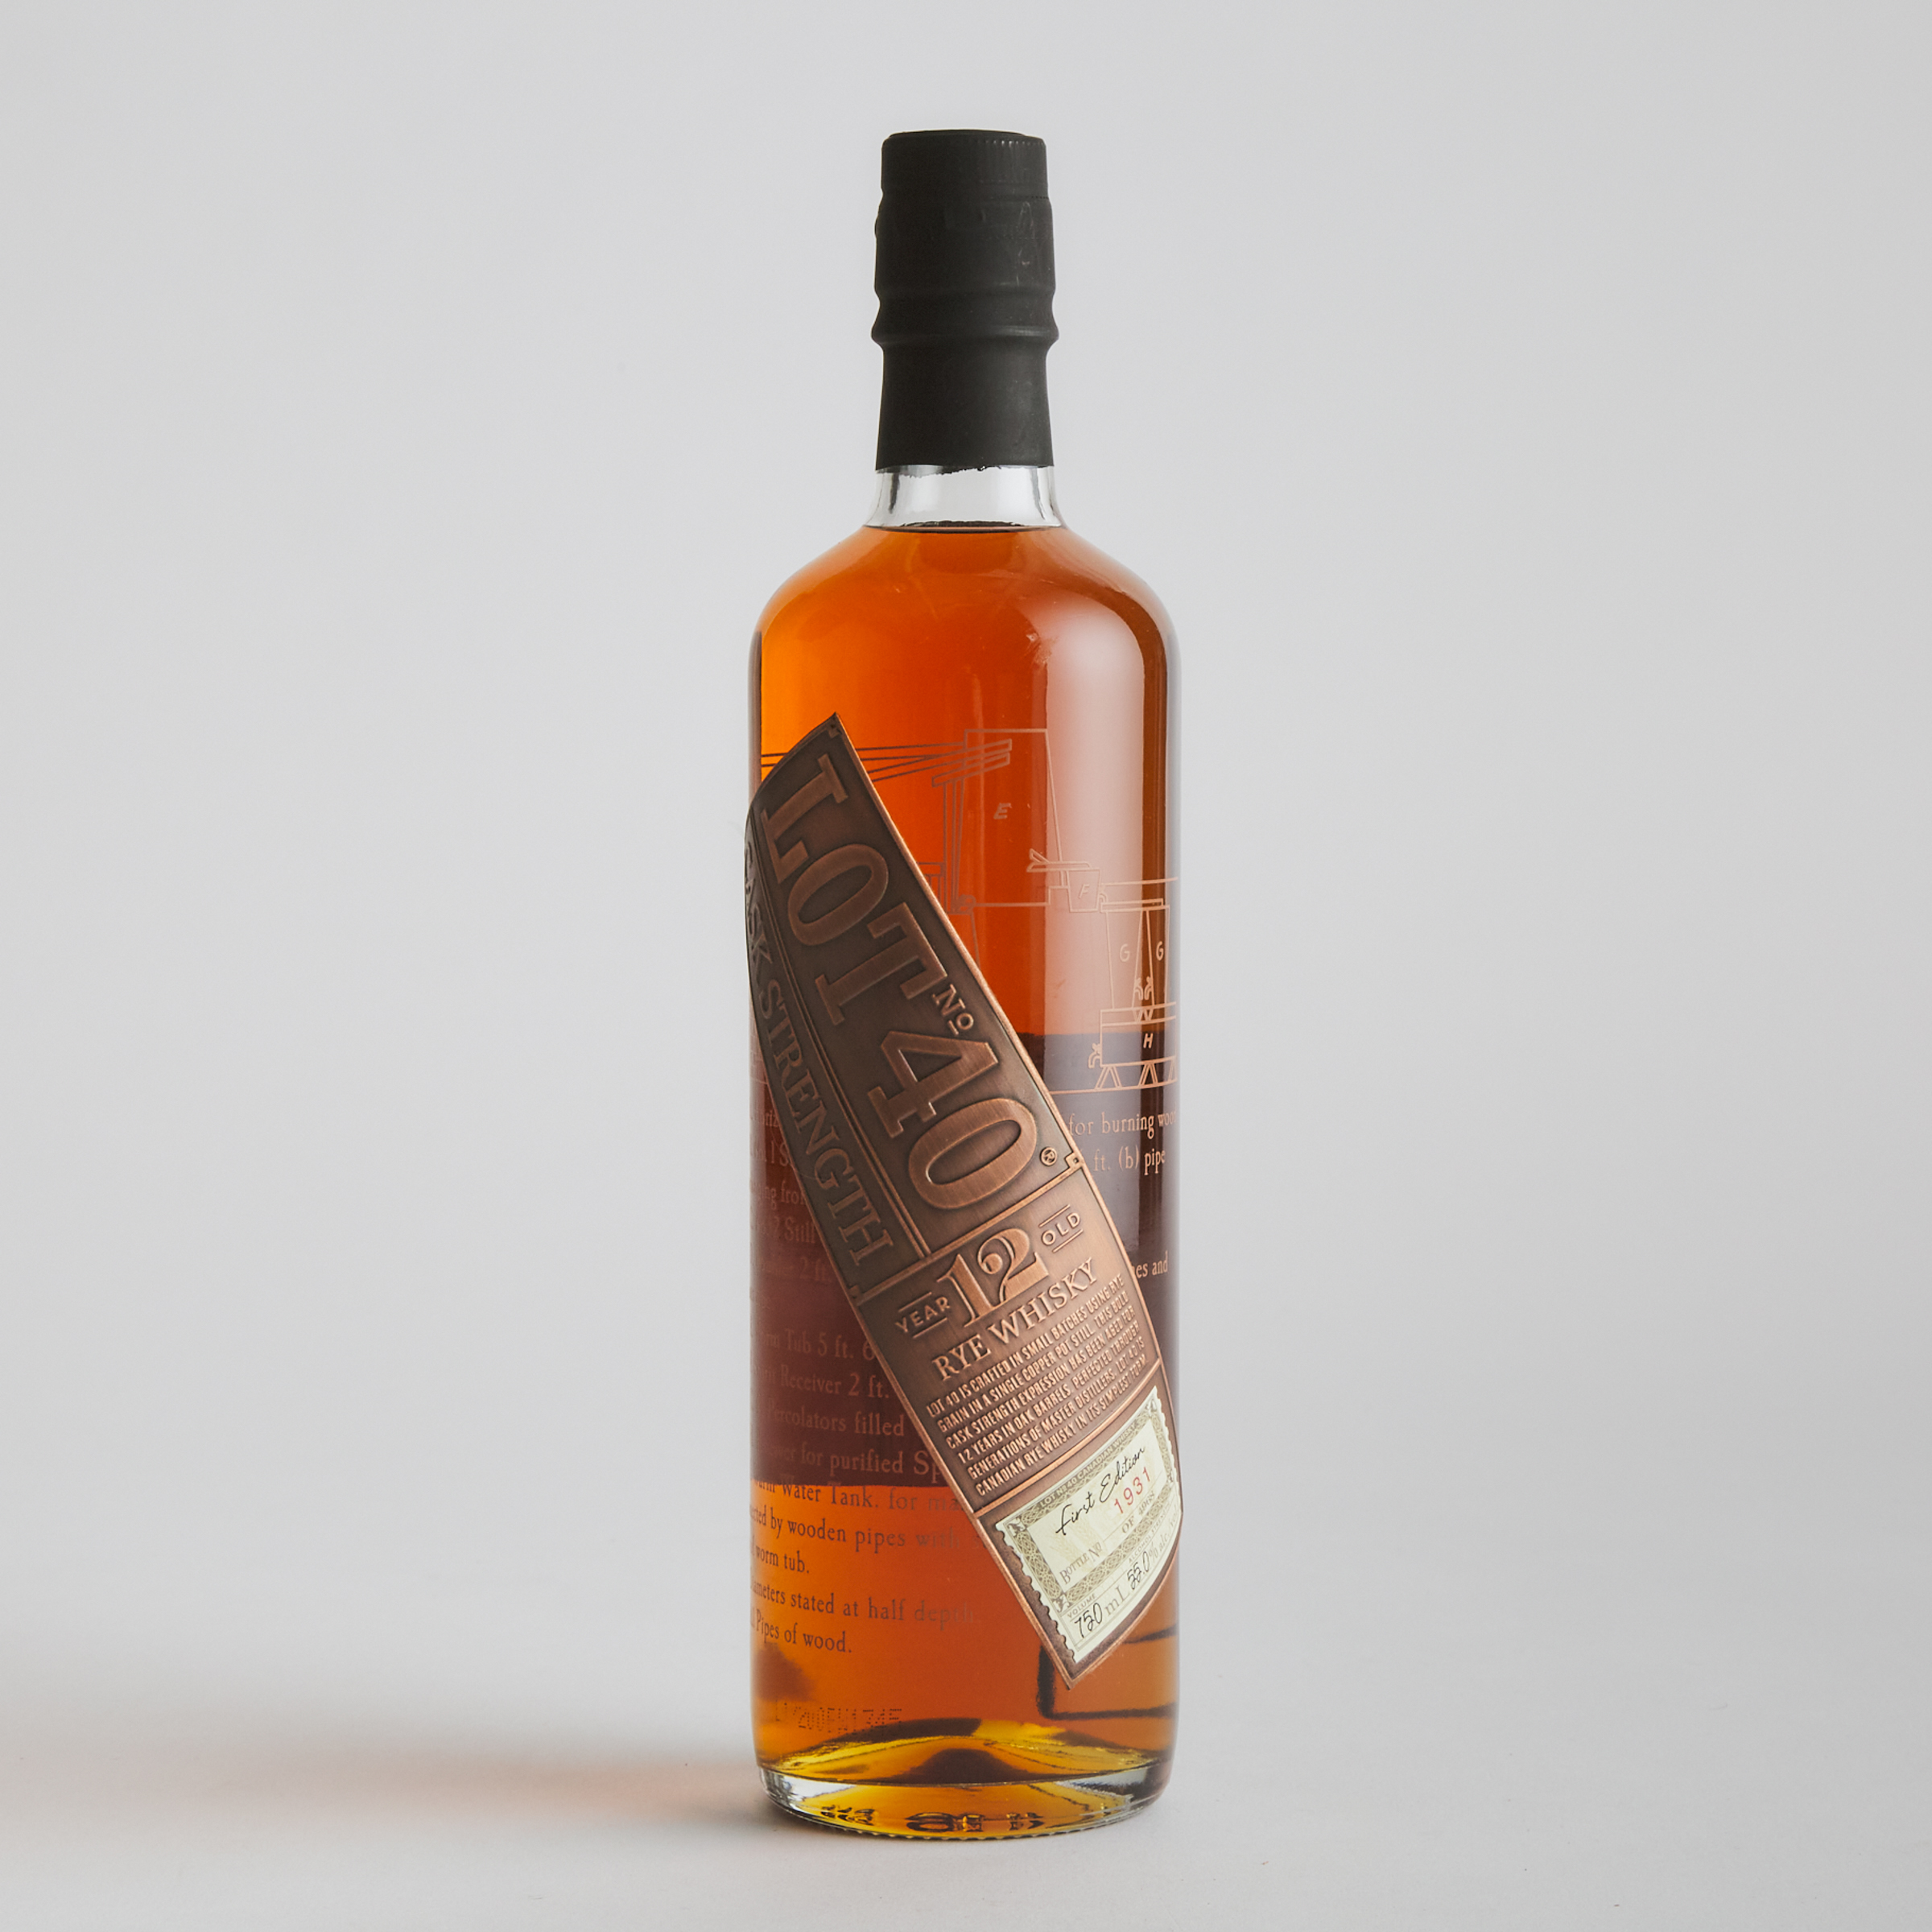 LOT 40 CASK STRENGTH RYE WHISKY 12 YEARS (ONE 750 ML)